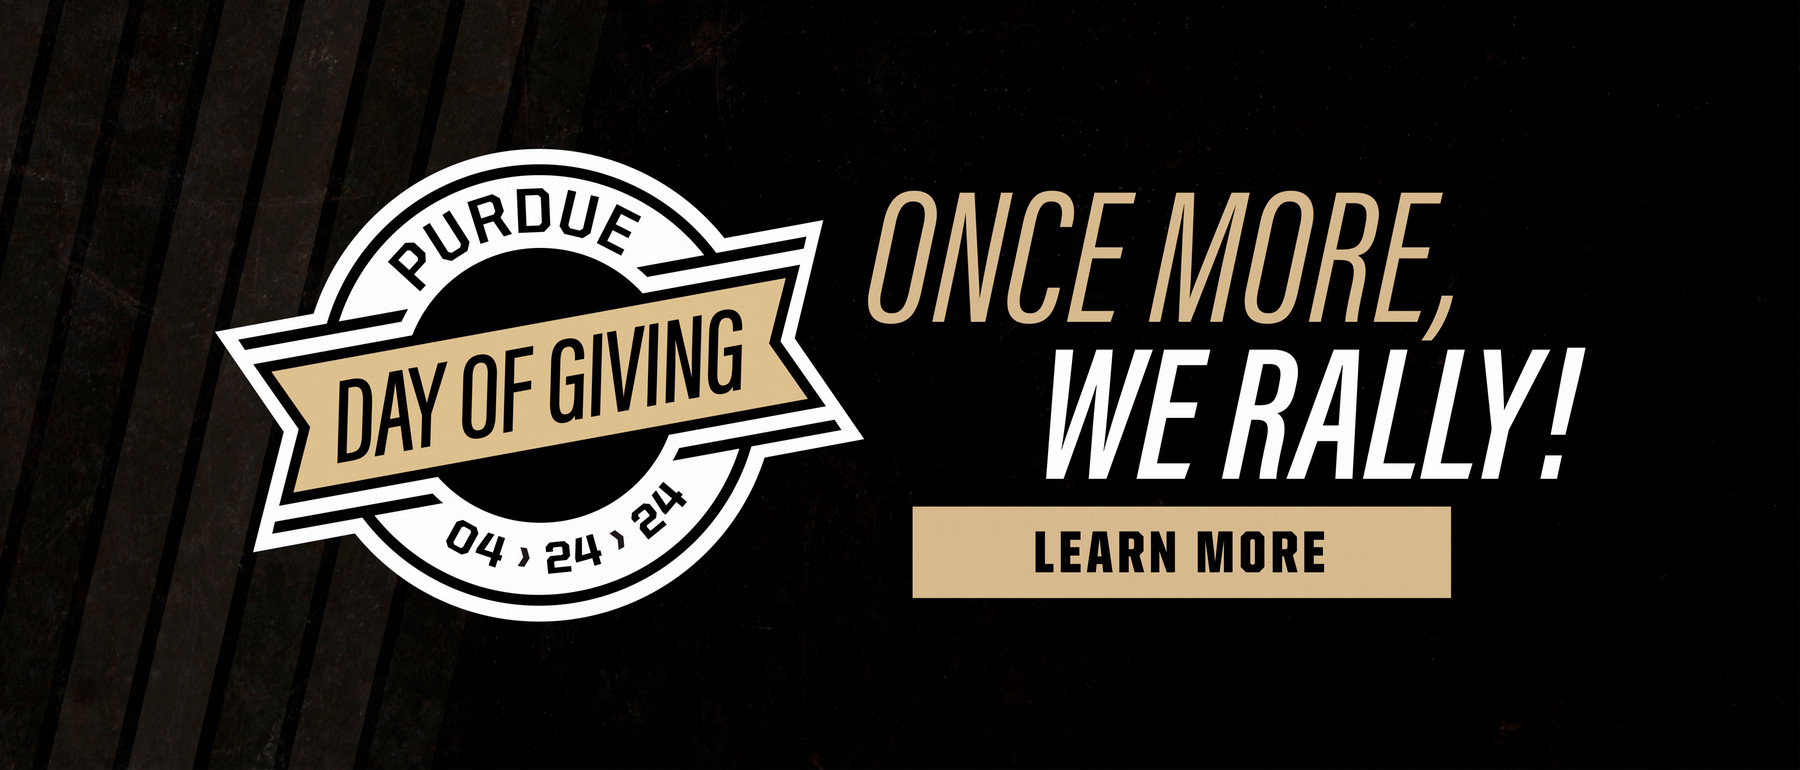 Purdue Day of Giving 